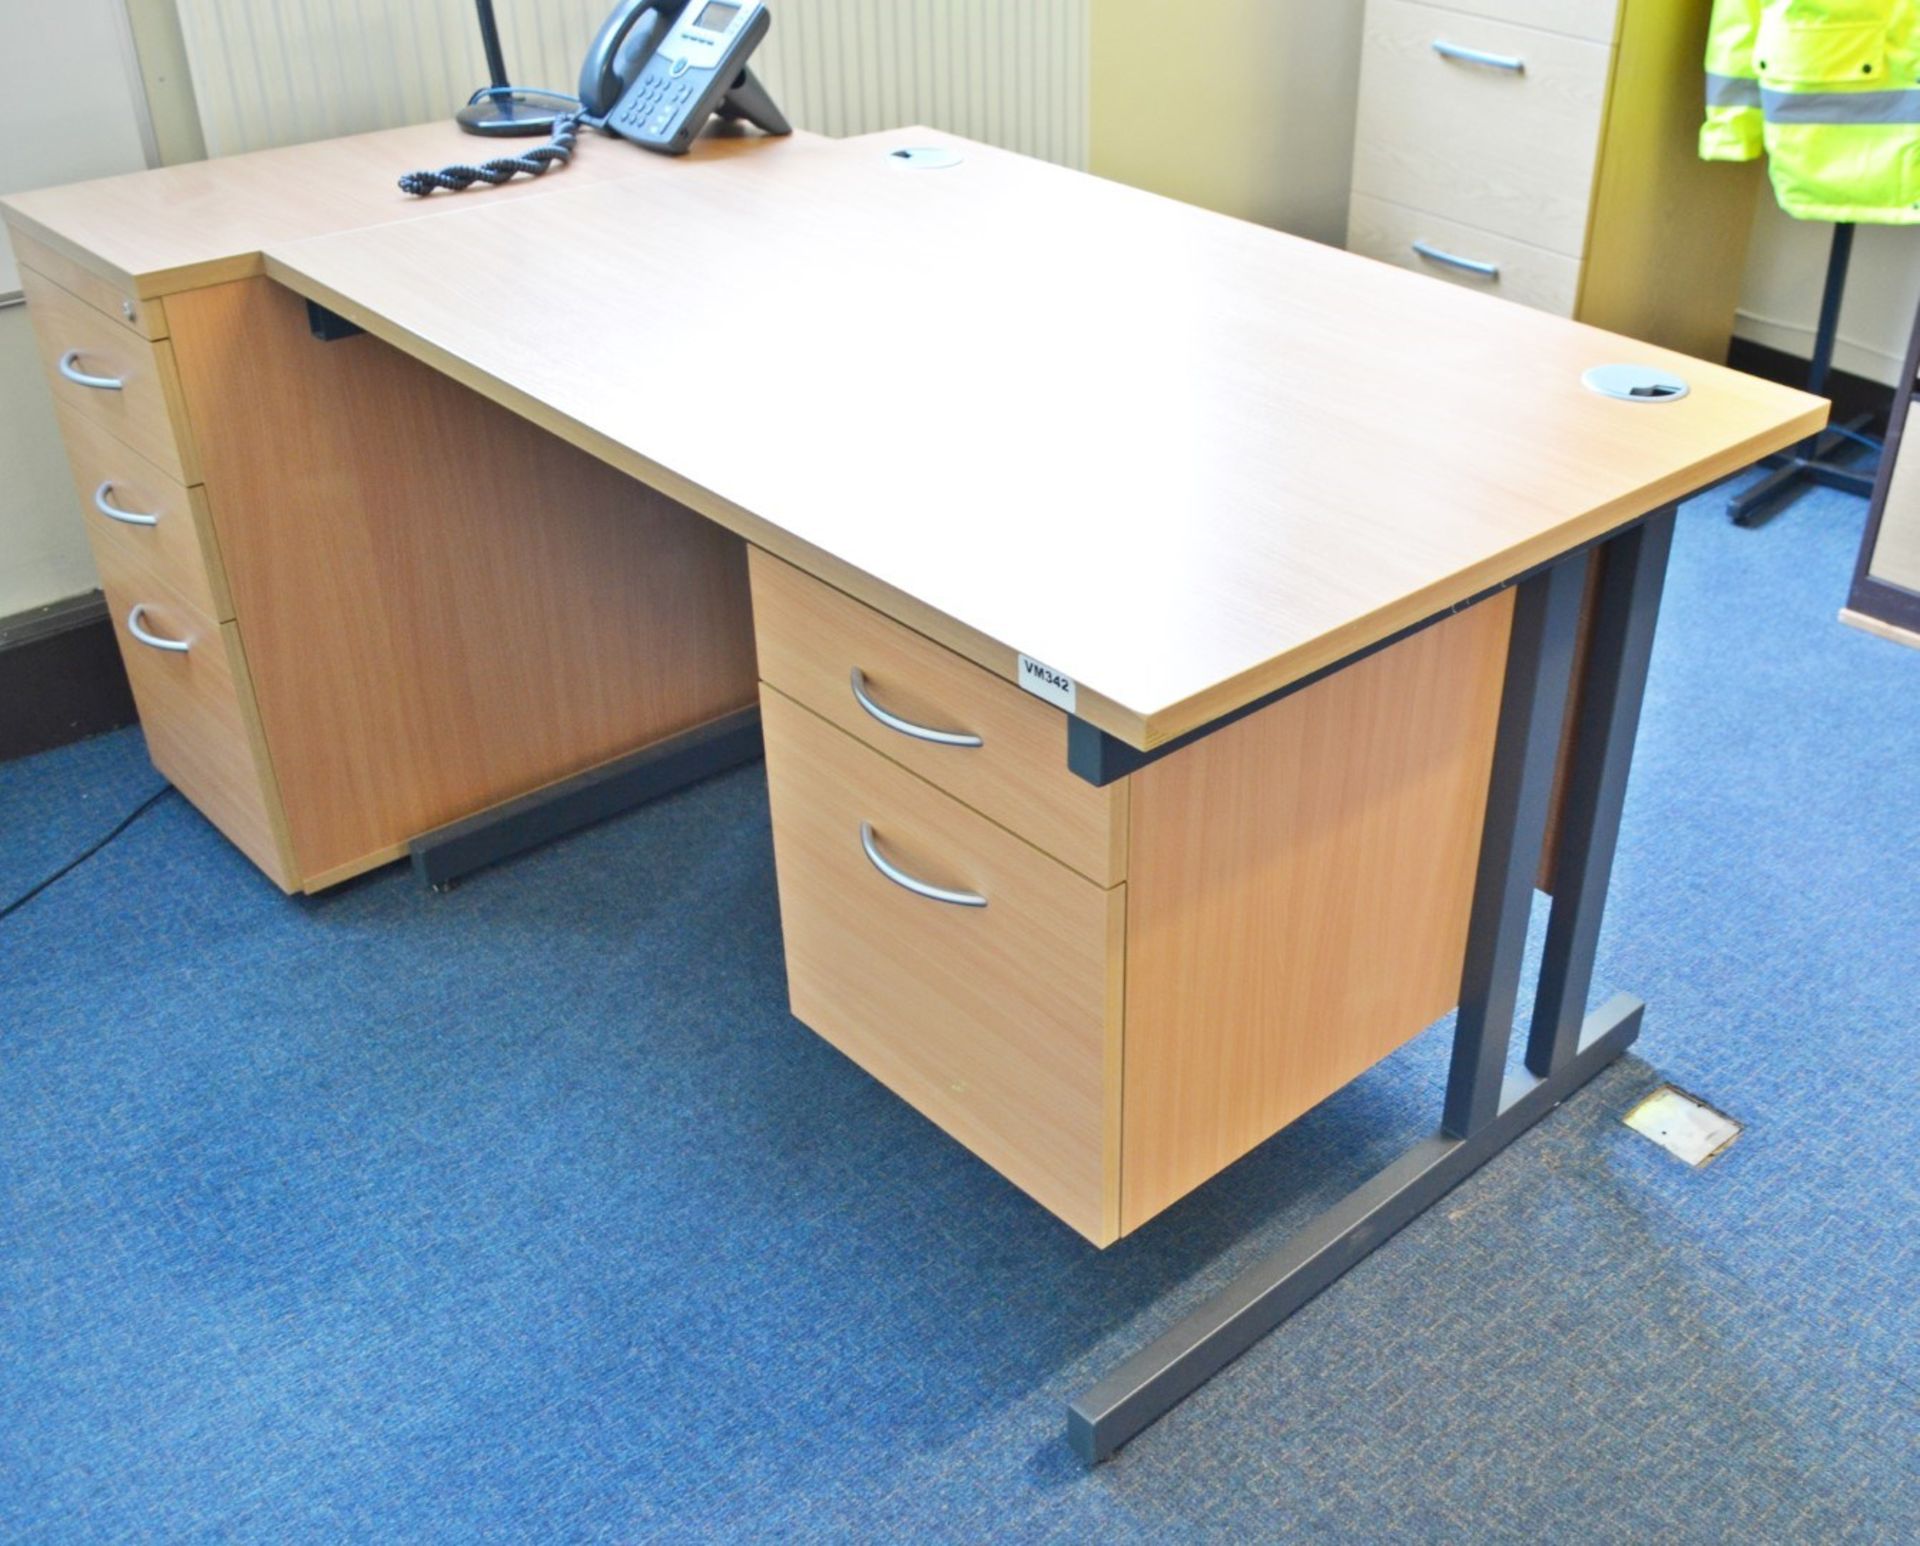 1 x Beech Office Desk Set With Drawer Pedestal, Chair and Storage Cabinet - Ref: VM342,VM346/A35 - Image 5 of 5